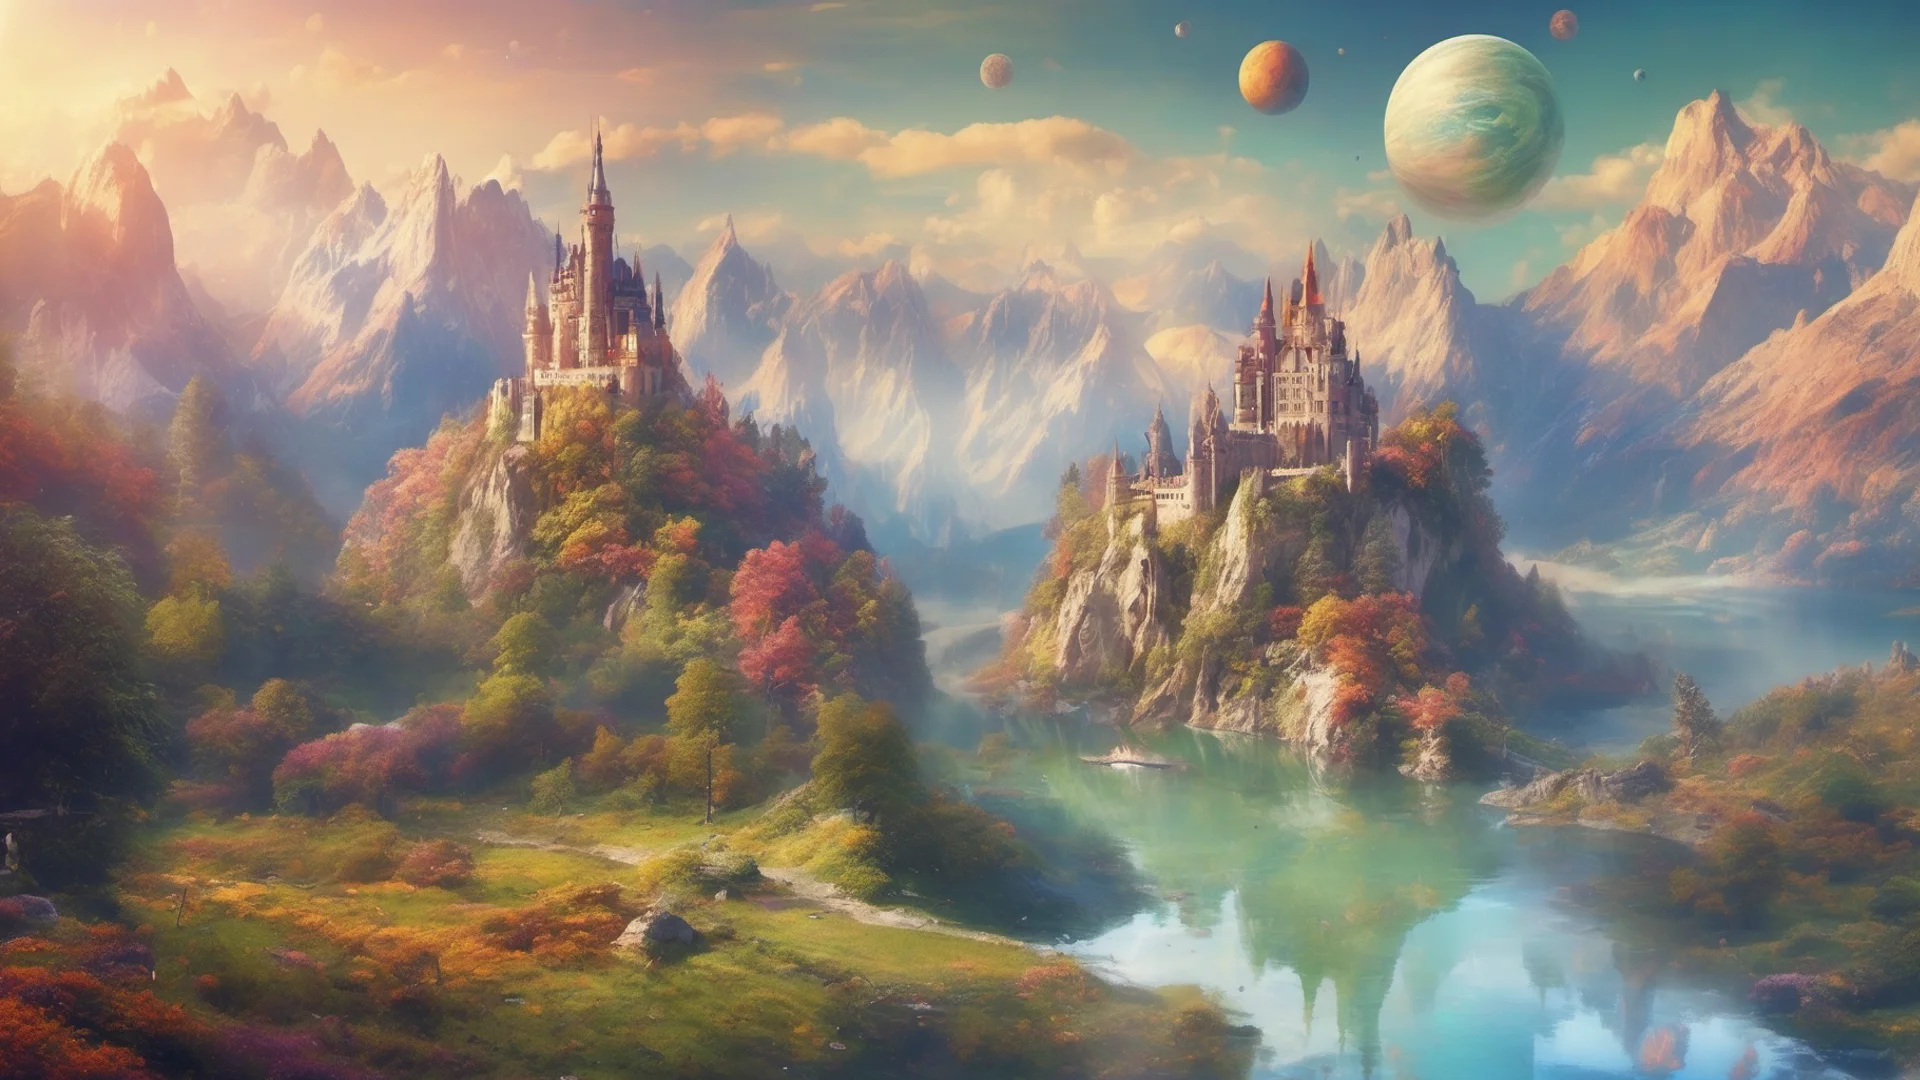 aibeautiful environment castle on mountains with lakes colorful planets amazing awesome portrait 2 wide